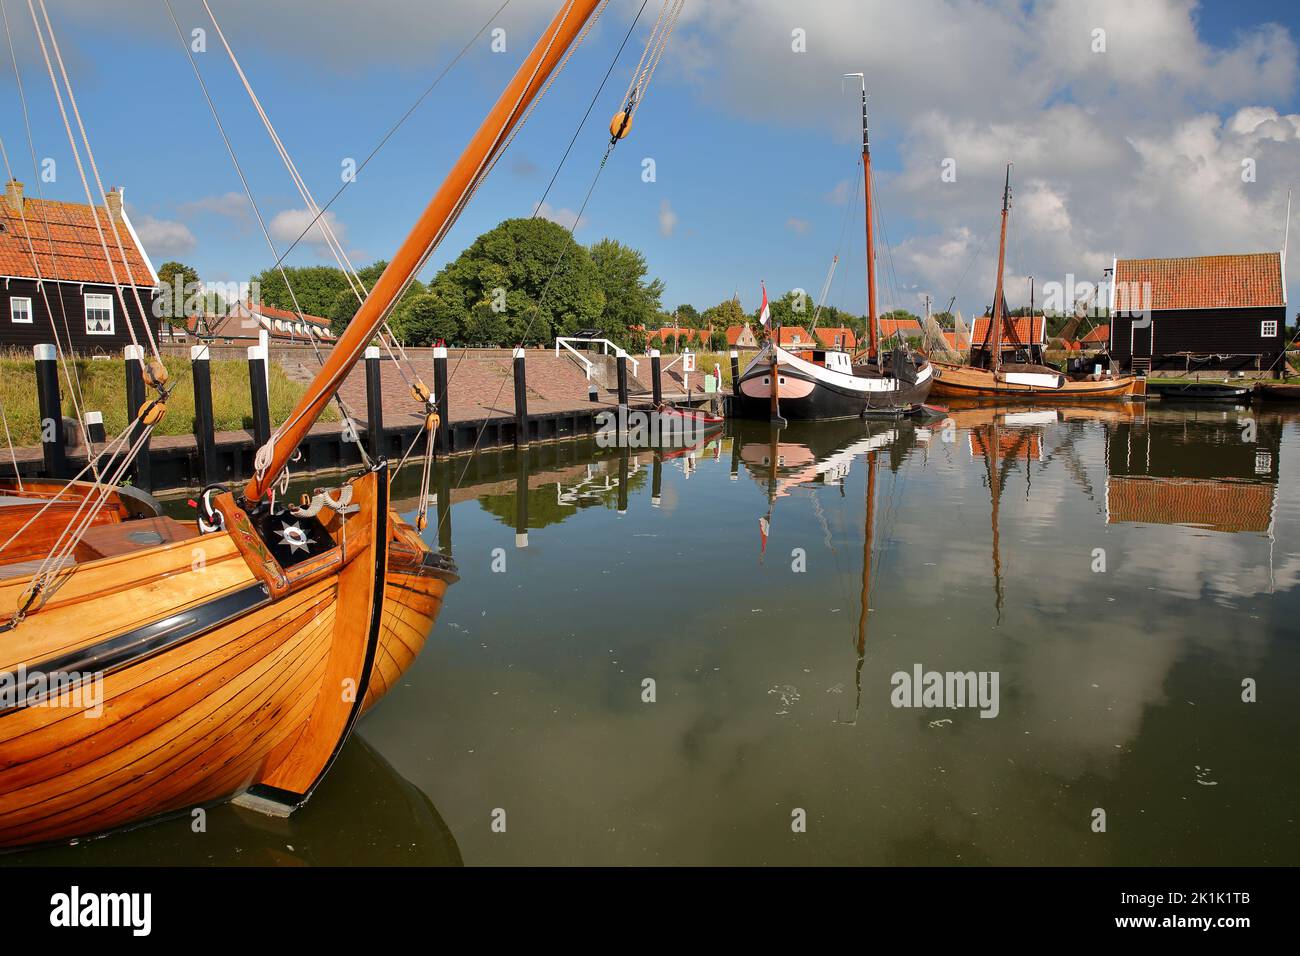 ENKHUIZEN, NETHERLANDS - SEPTEMBER 11, 2022: Zuiderzeemuseum, an open air museum on the shore of Ijsselmeer, with traditional fishermen cottages Stock Photo